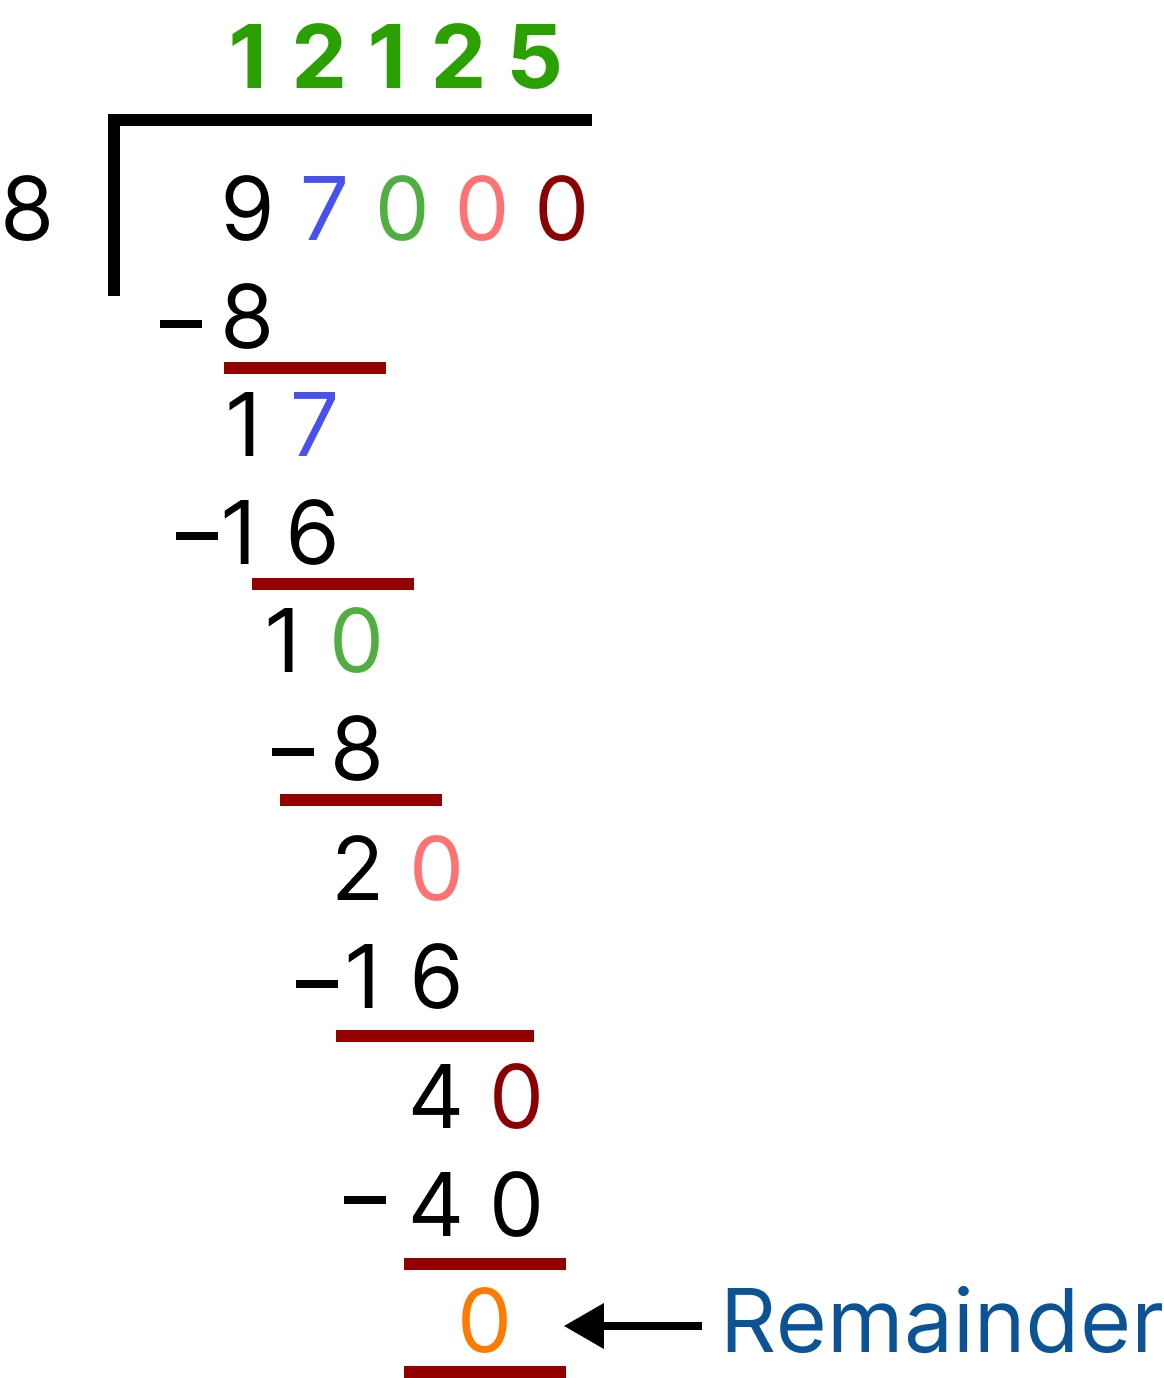 Division (97,000 is also divisible by 8)